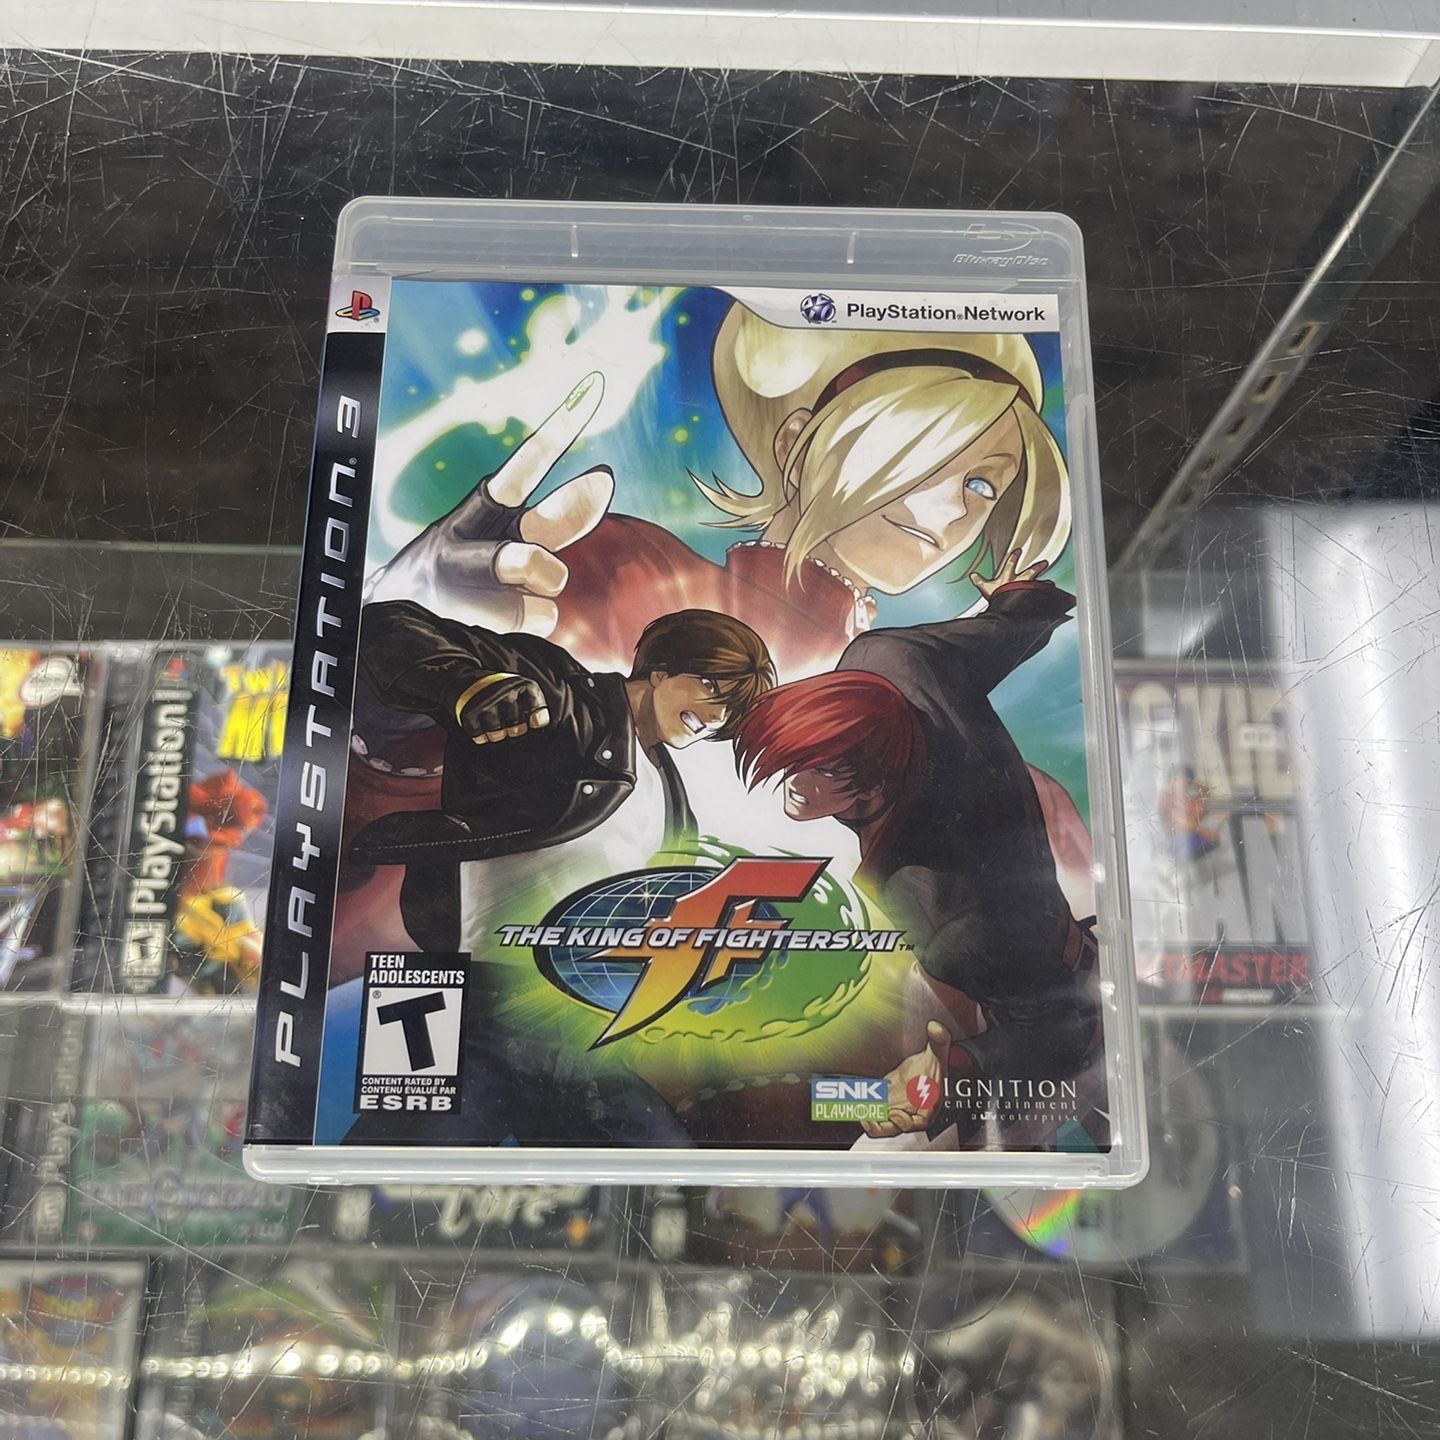 King Of Fighters Xll Ps3 $60 Gamehogs 11am-7pm